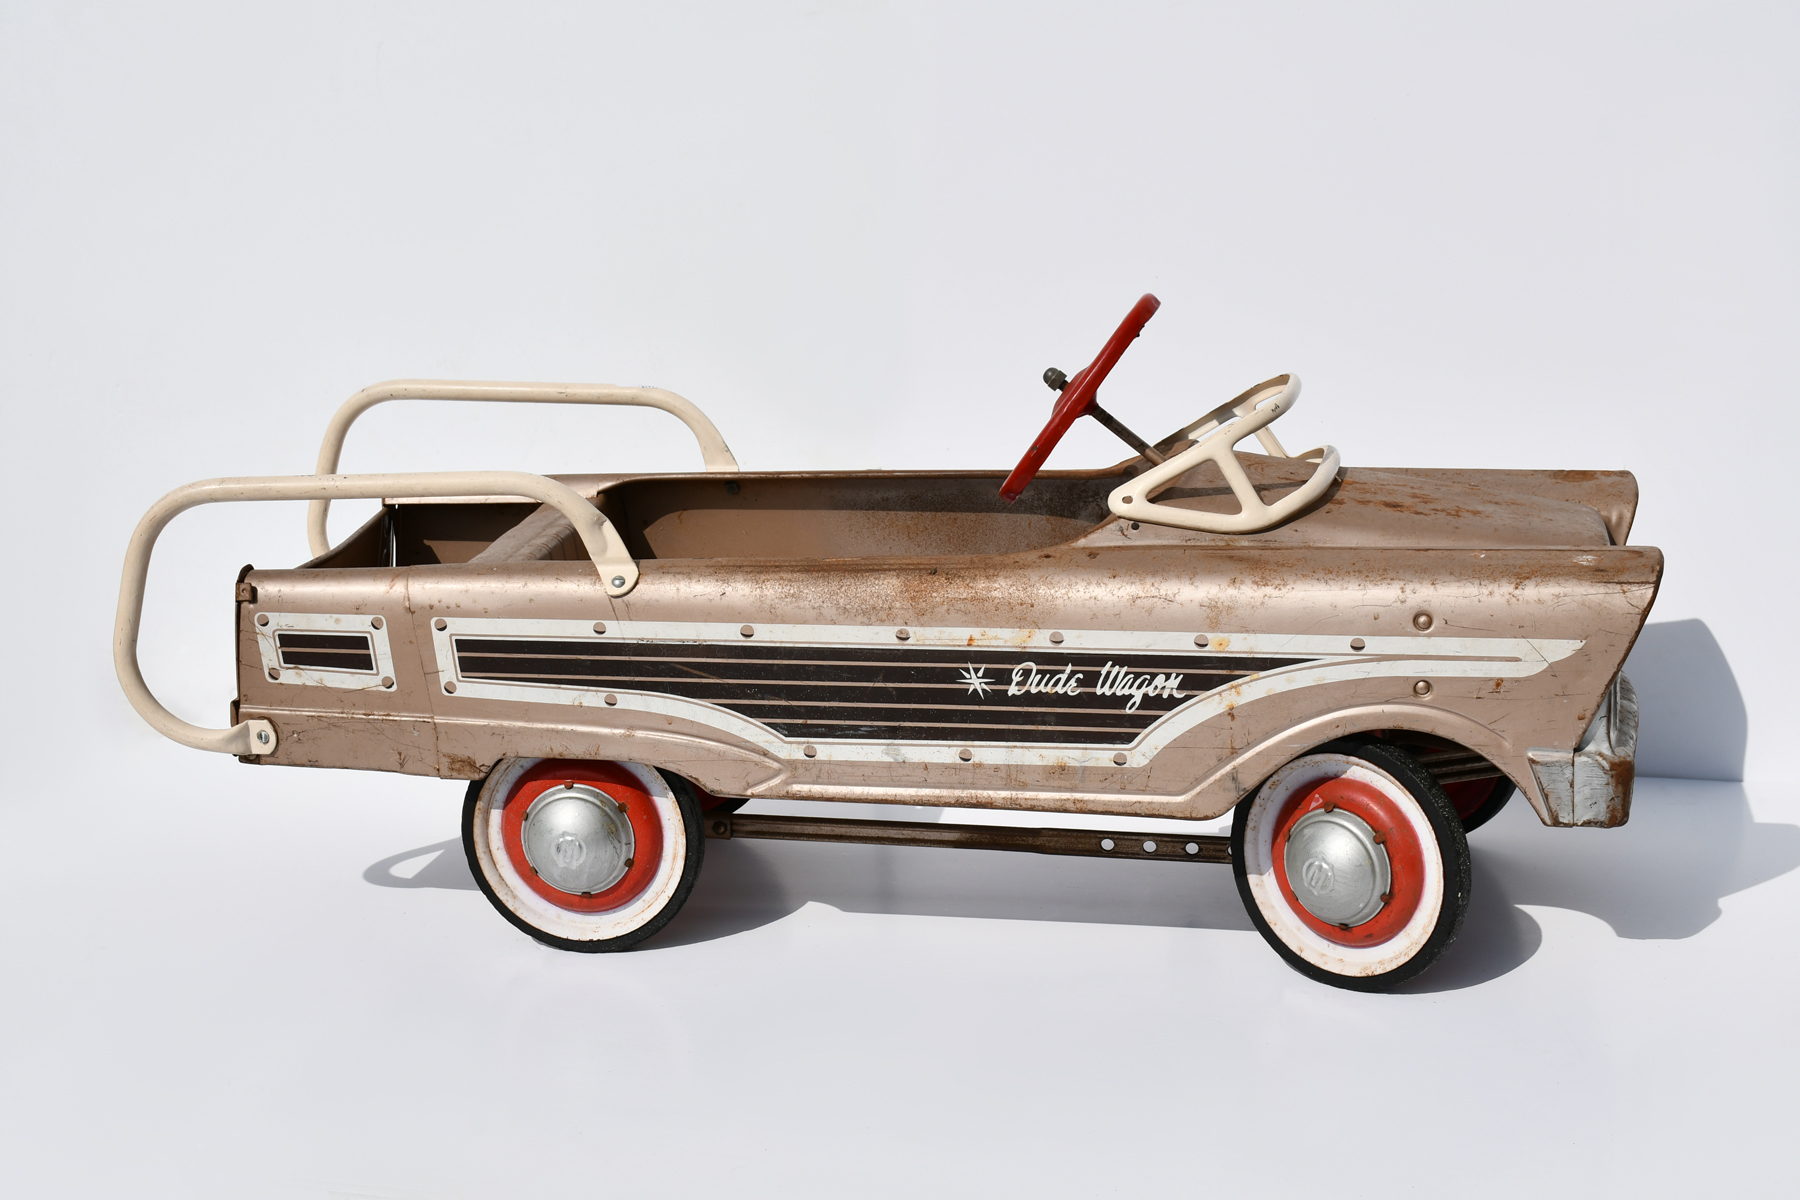 1960S MURRAY DUDE WAGON PEDAL CAR: This